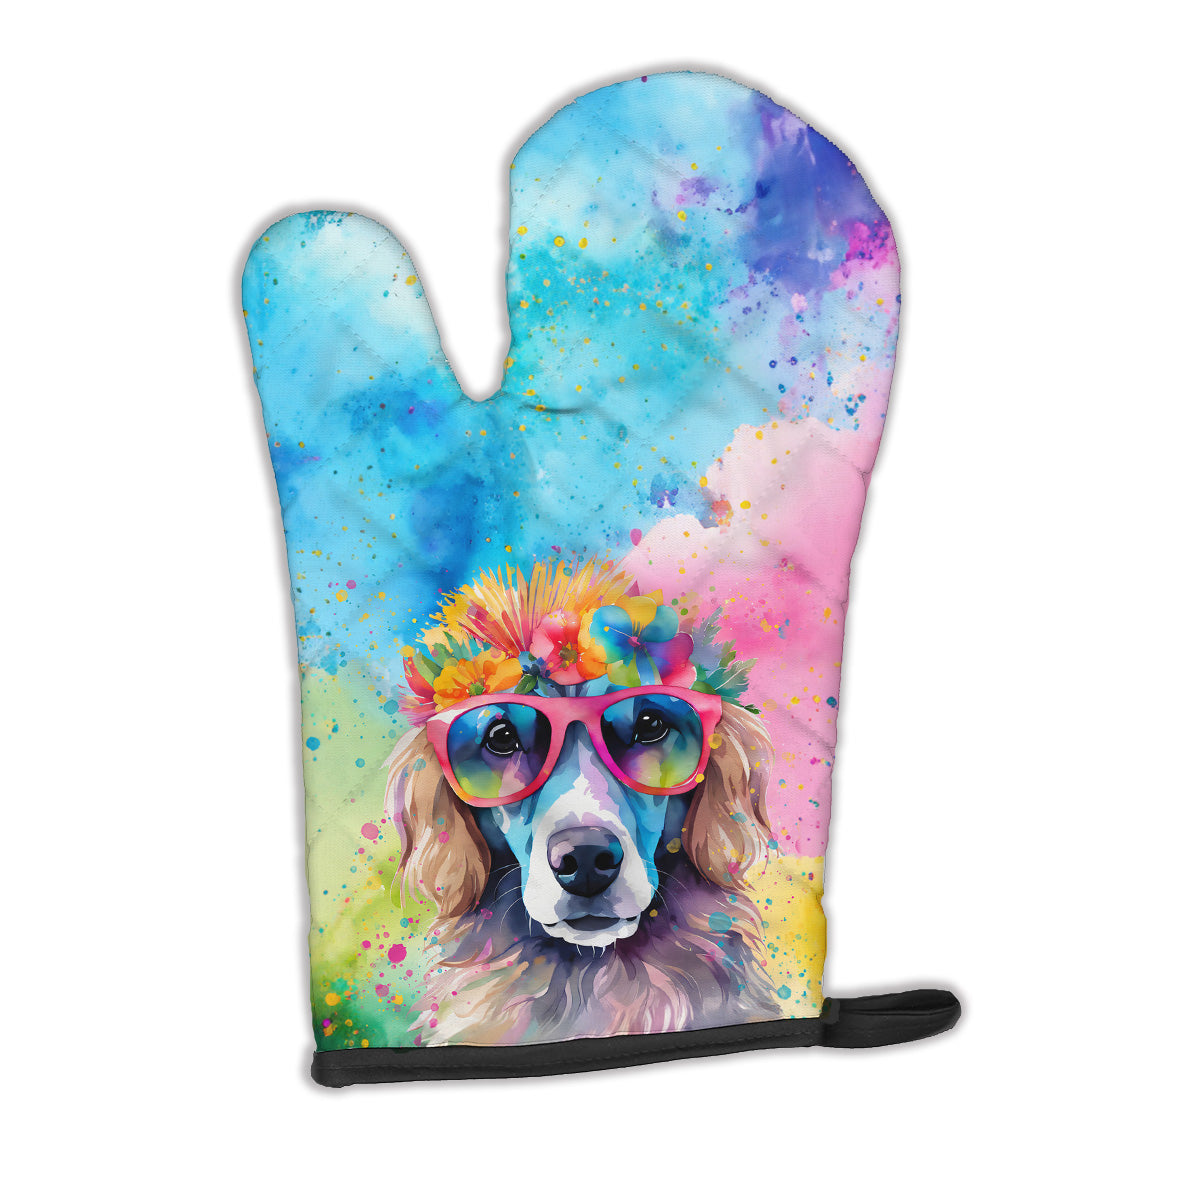 Buy this Poodle Hippie Dawg Oven Mitt